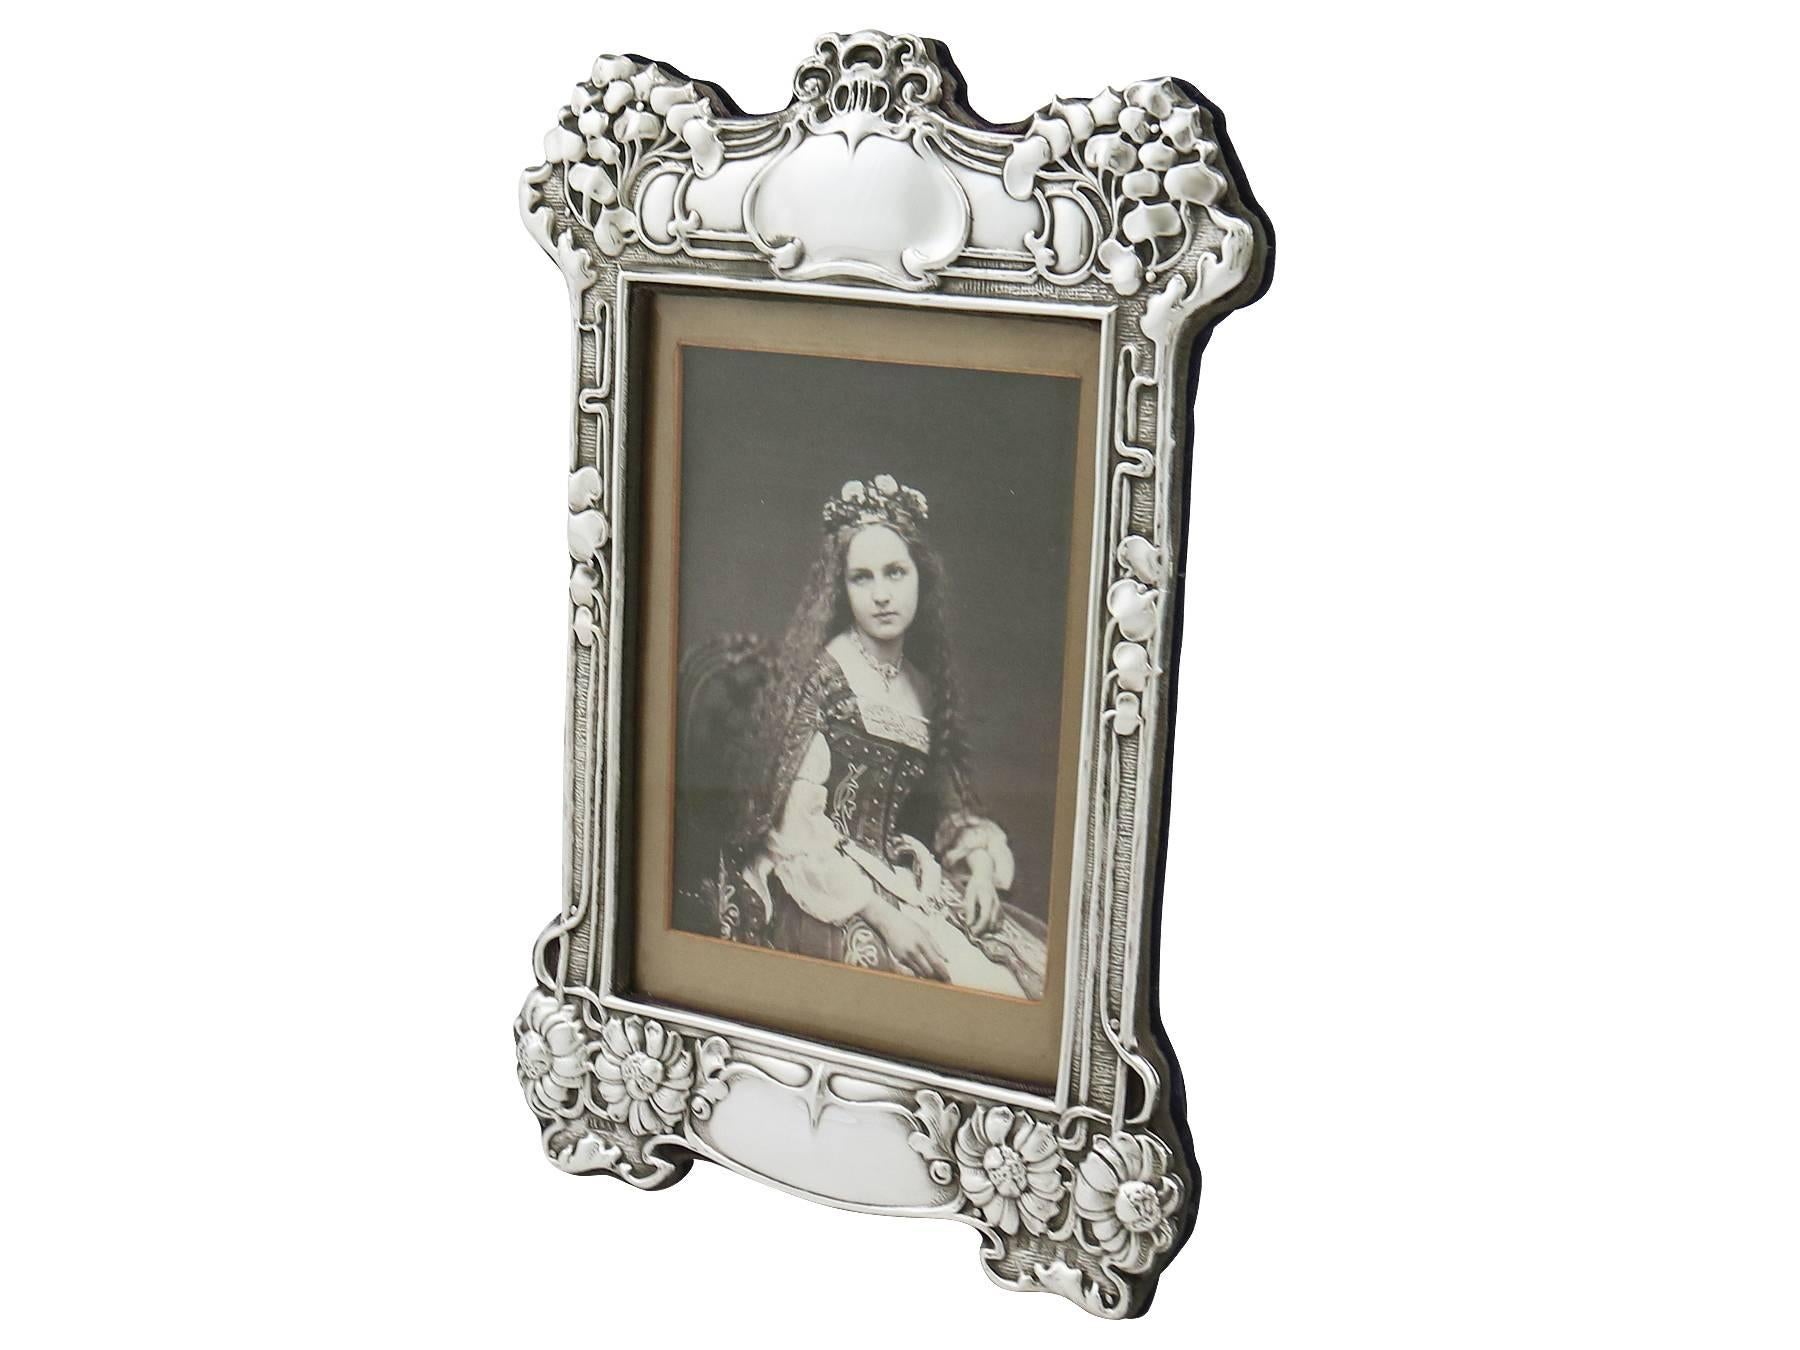 An exceptional, fine and impressive antique Edwardian sterling silver photograph frame made in the Art Nouveau style; an addition to our ornamental silverware collection.

This exceptional antique Edwardian sterling silver photograph frame has a